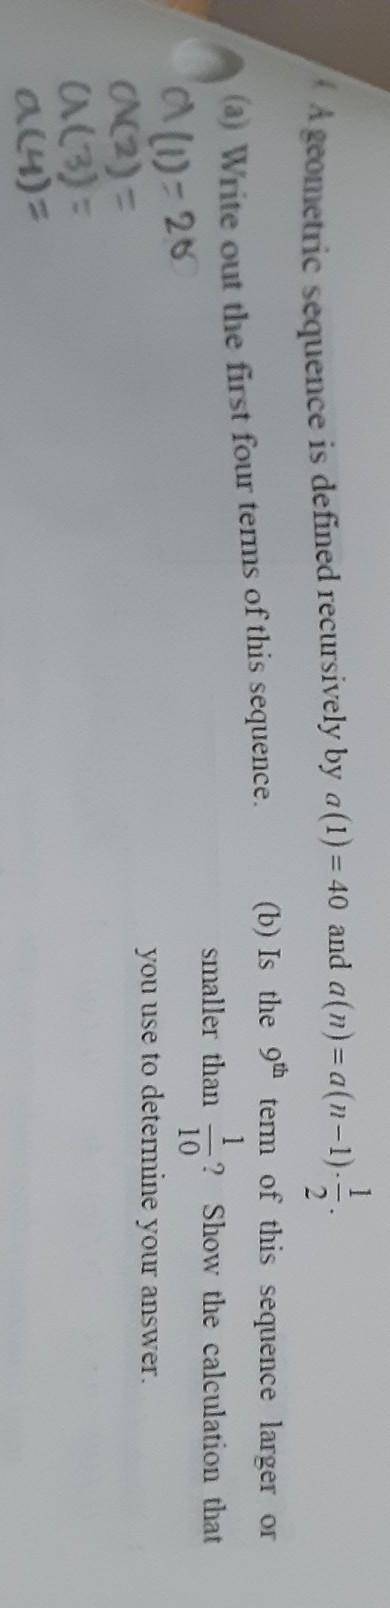 I need help with problems 4 a and b please. Picture included, you might have to turn the picture.